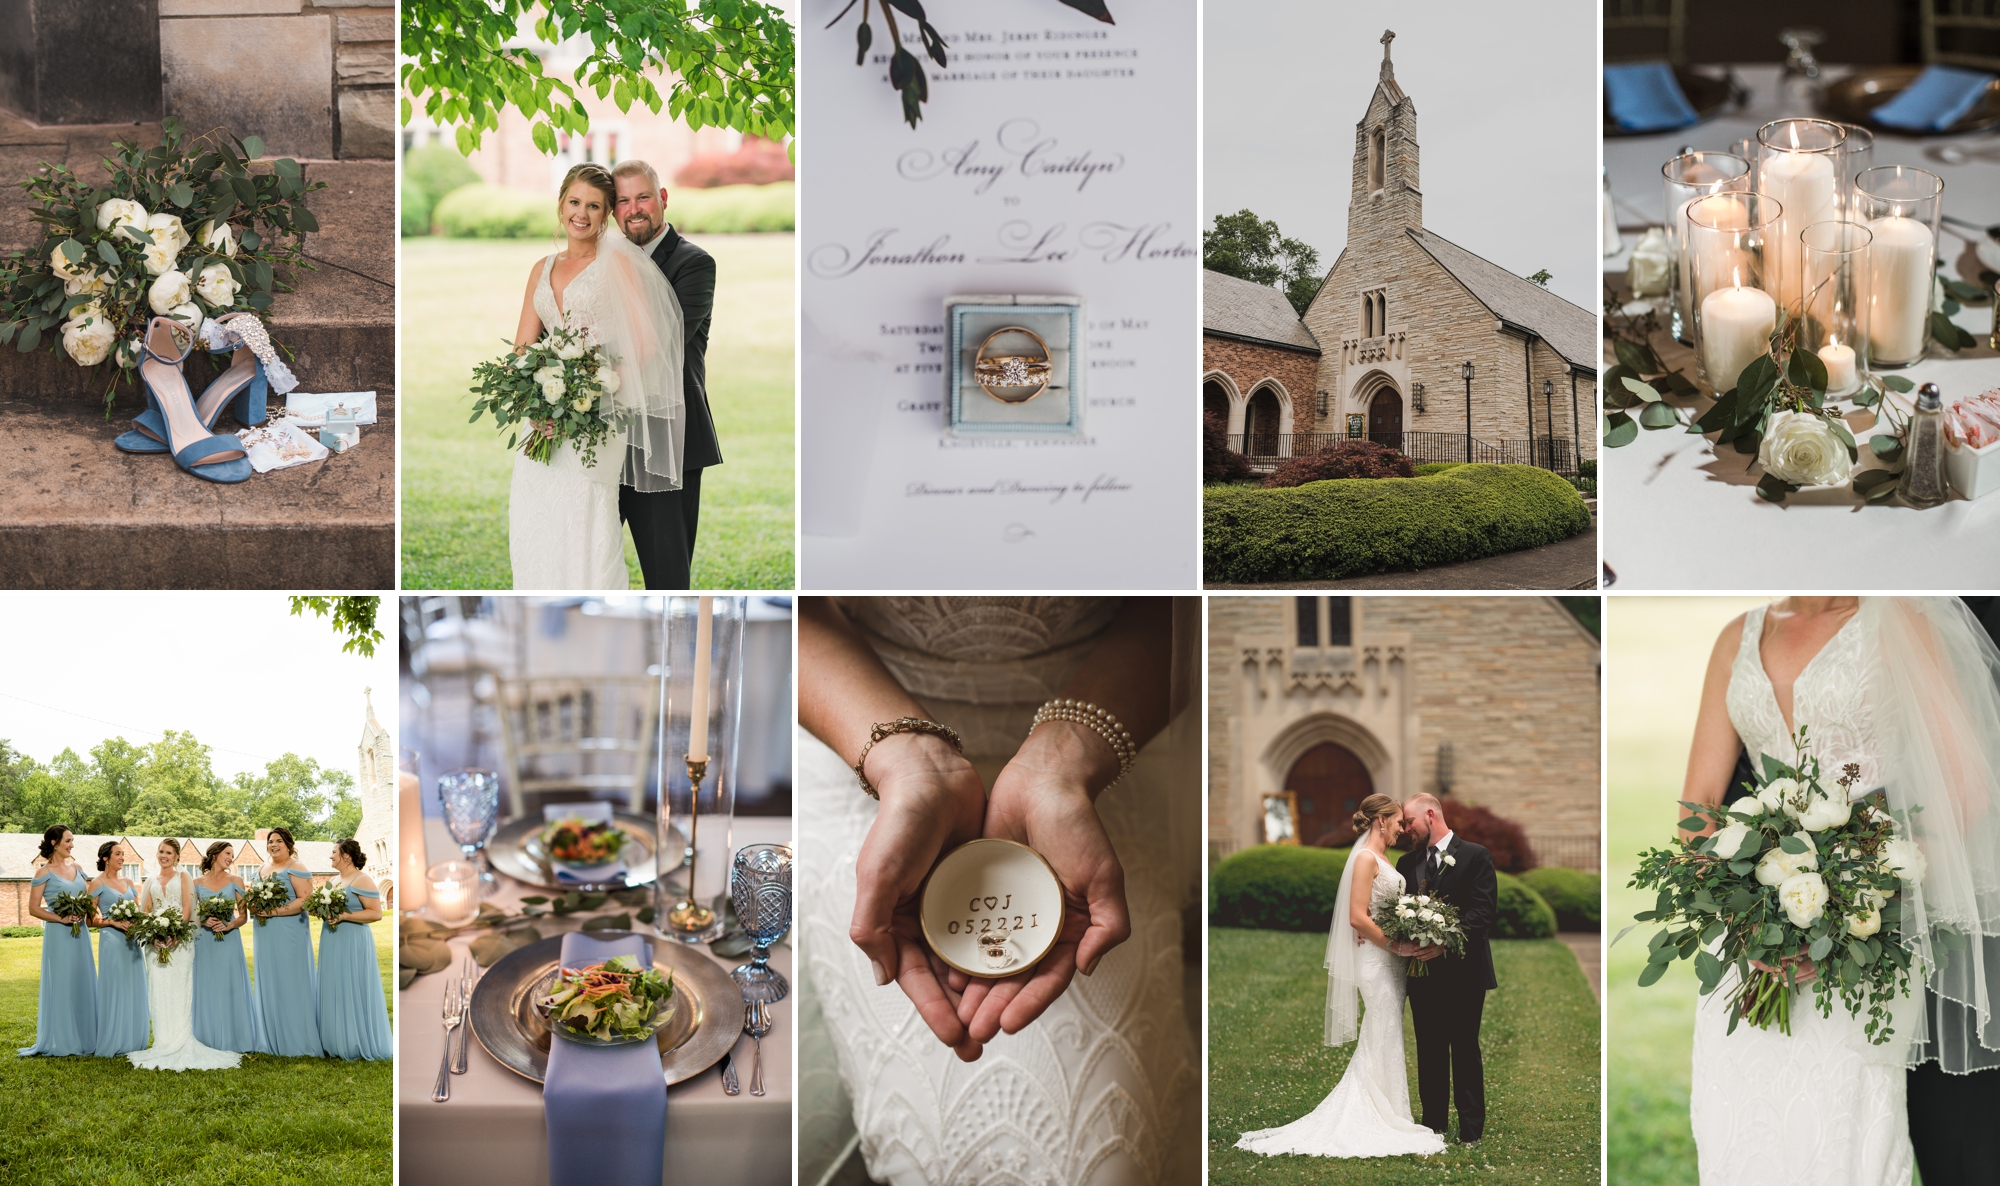 Graystone Presbyterian wedding and reception at The Foundry in Knoxville, TN